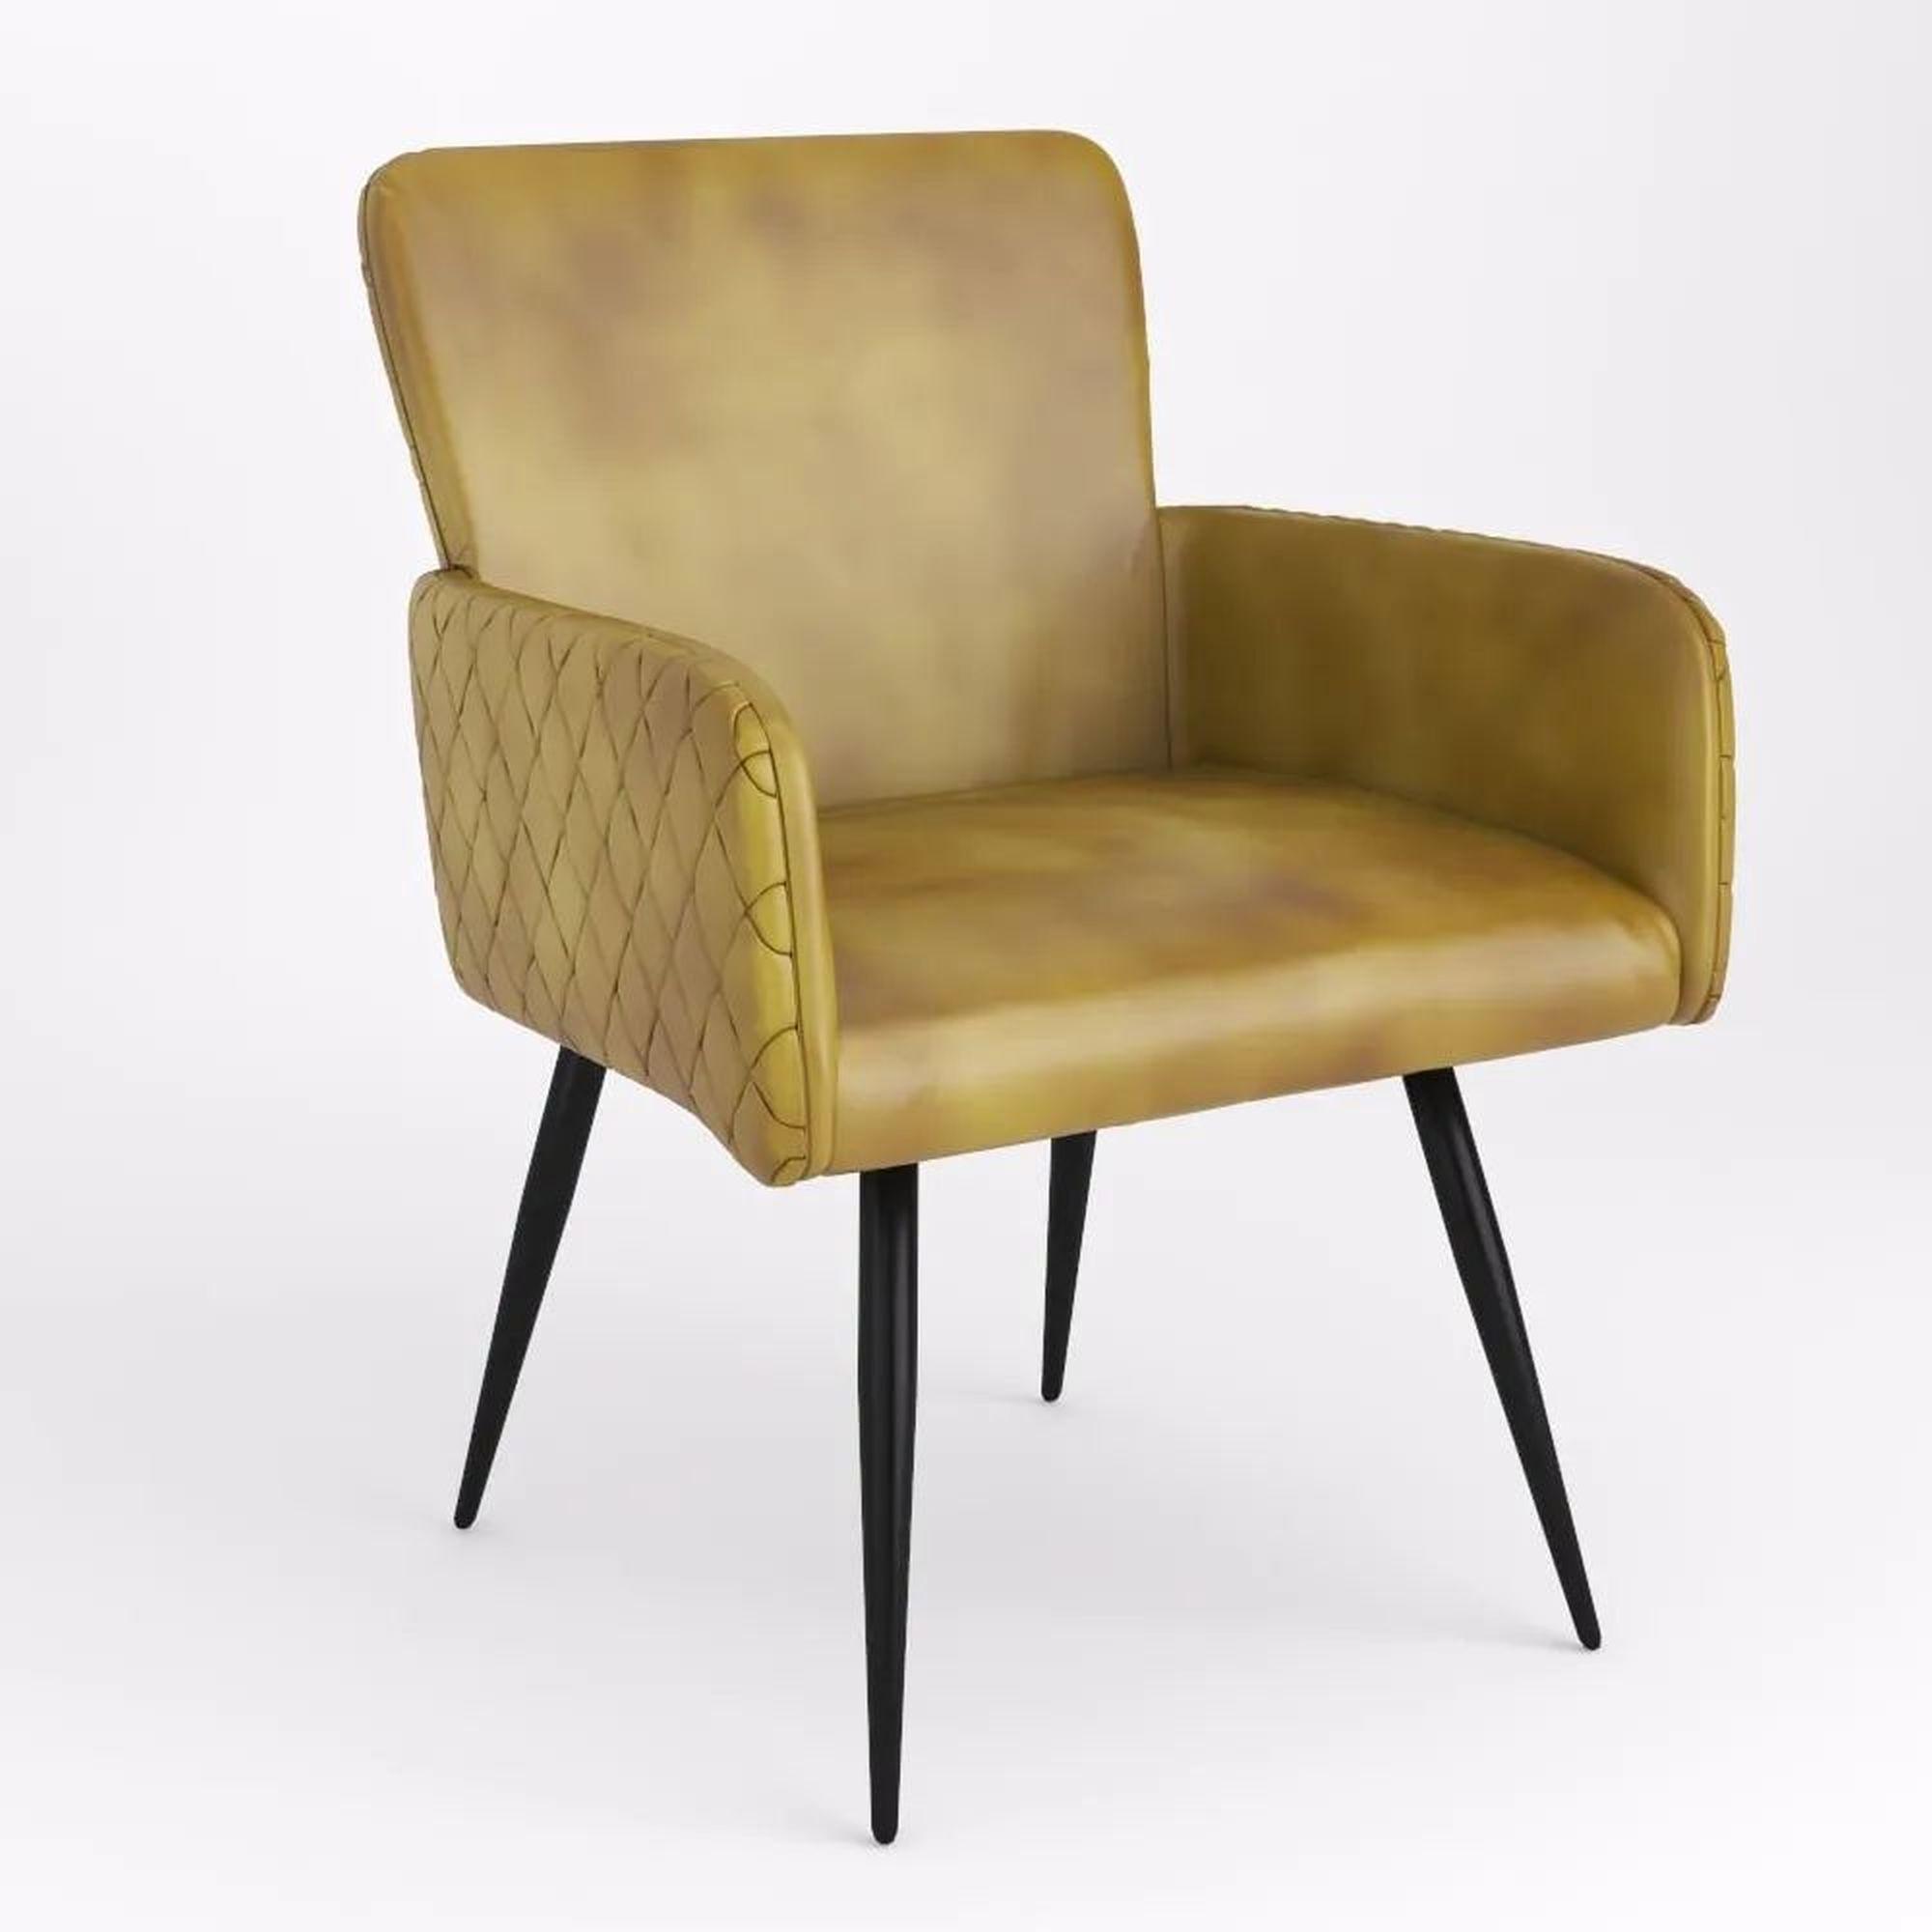 Stanton Mustard Dining Armchair, Genuine Leather with Metal Legs (Sold in Pairs)